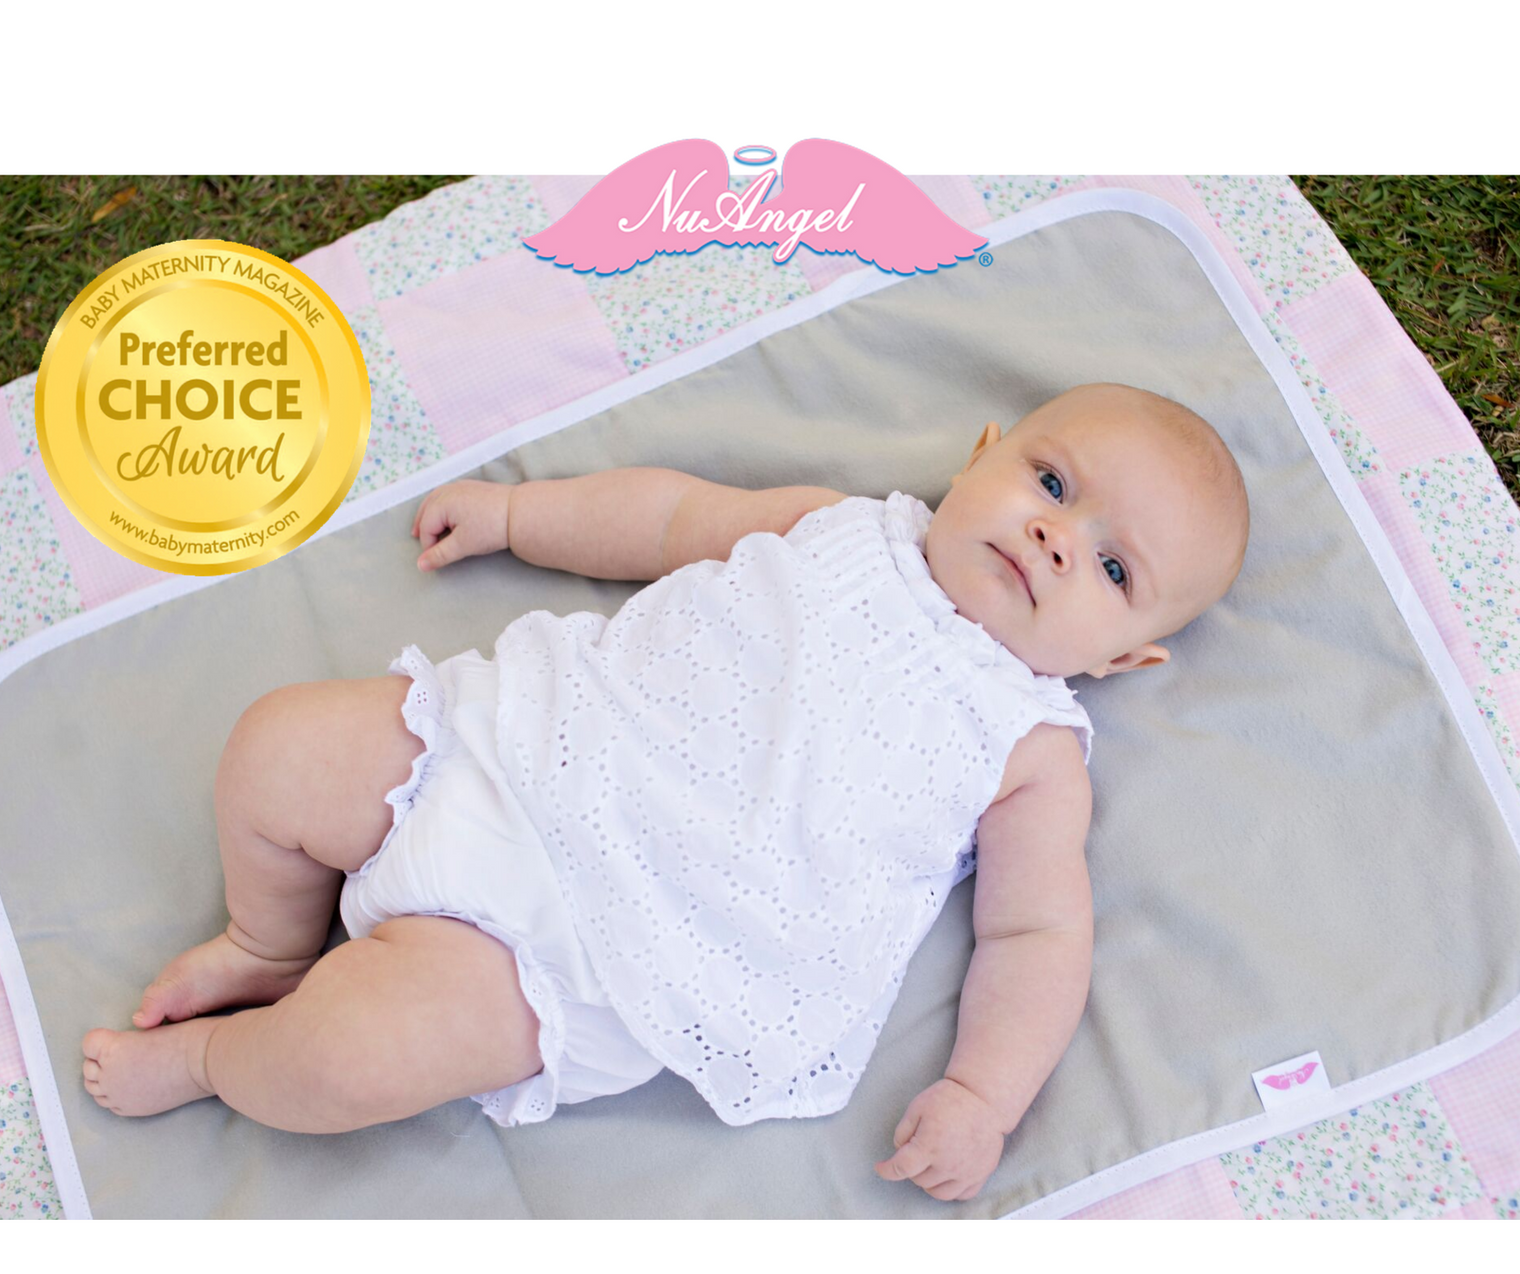 NuAngel Changing Pads Receive “Preferred Choice” Award